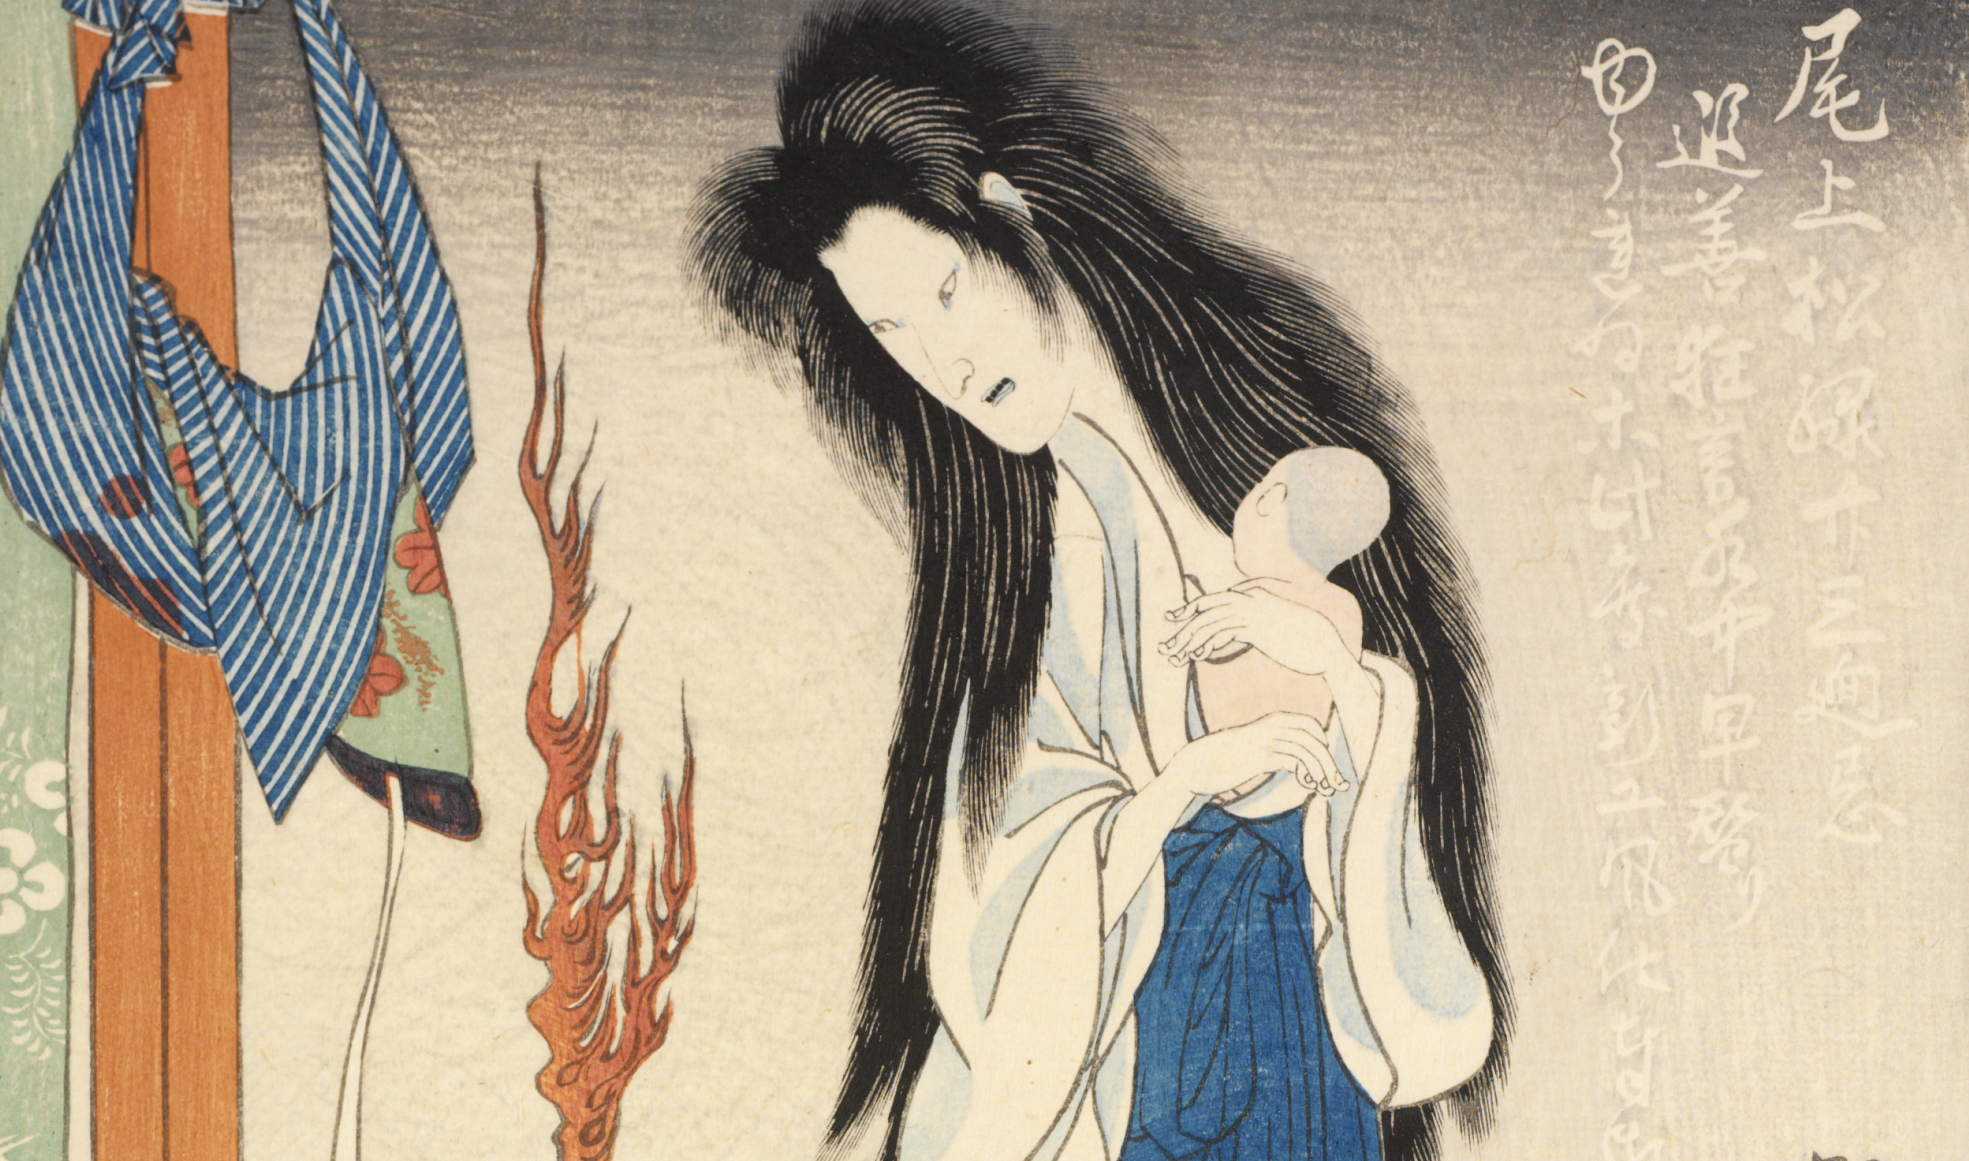 A Japanese print of a ghostly figure with long black hair hovering at the center pf the print, holding a baby and looking down. The figure is tethered to a tied cloth hanging to its right.